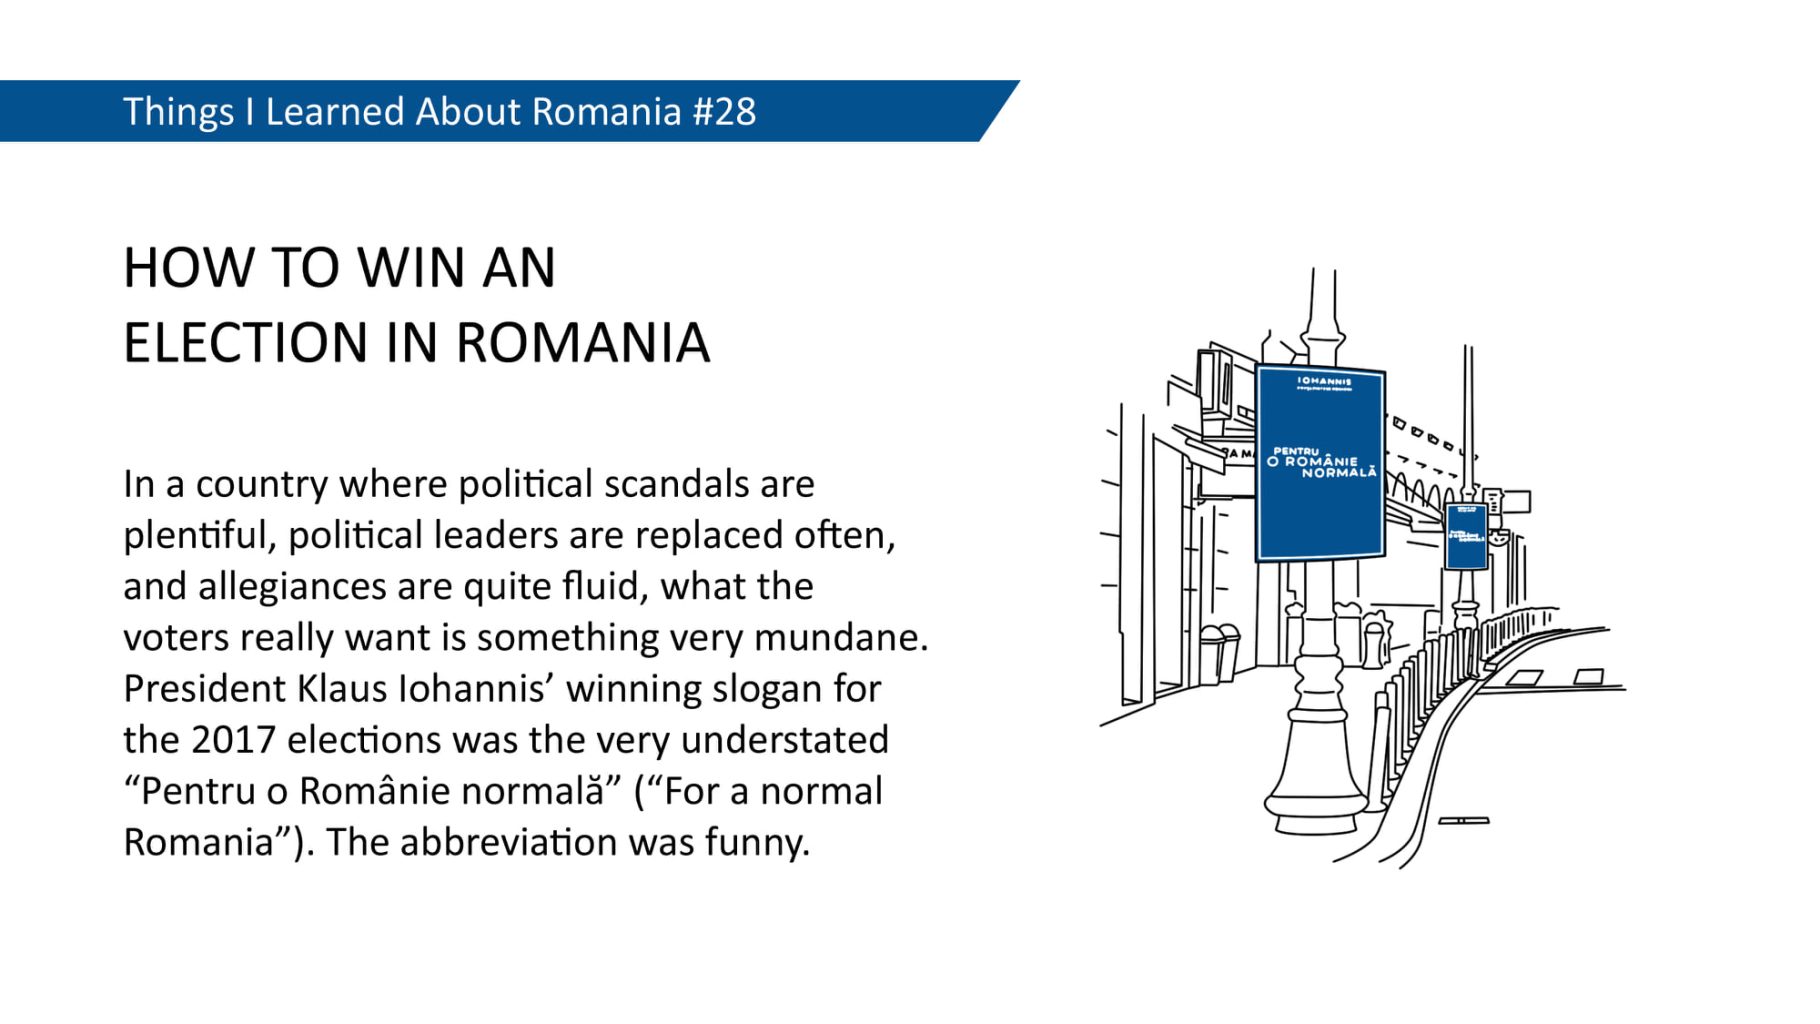 HOW TO WIN AN ELECTION IN ROMANIA - In a country where political scandals are plentiful, political leaders are replaced often, and allegiances are quite fluid, what the voters really want is something very mundane. President Klaus lohannis' winning slogan for the 2017 elections was the very understated "Pentru o Românie normalà" ("For a normal Romania"). The abbreviation was funny.